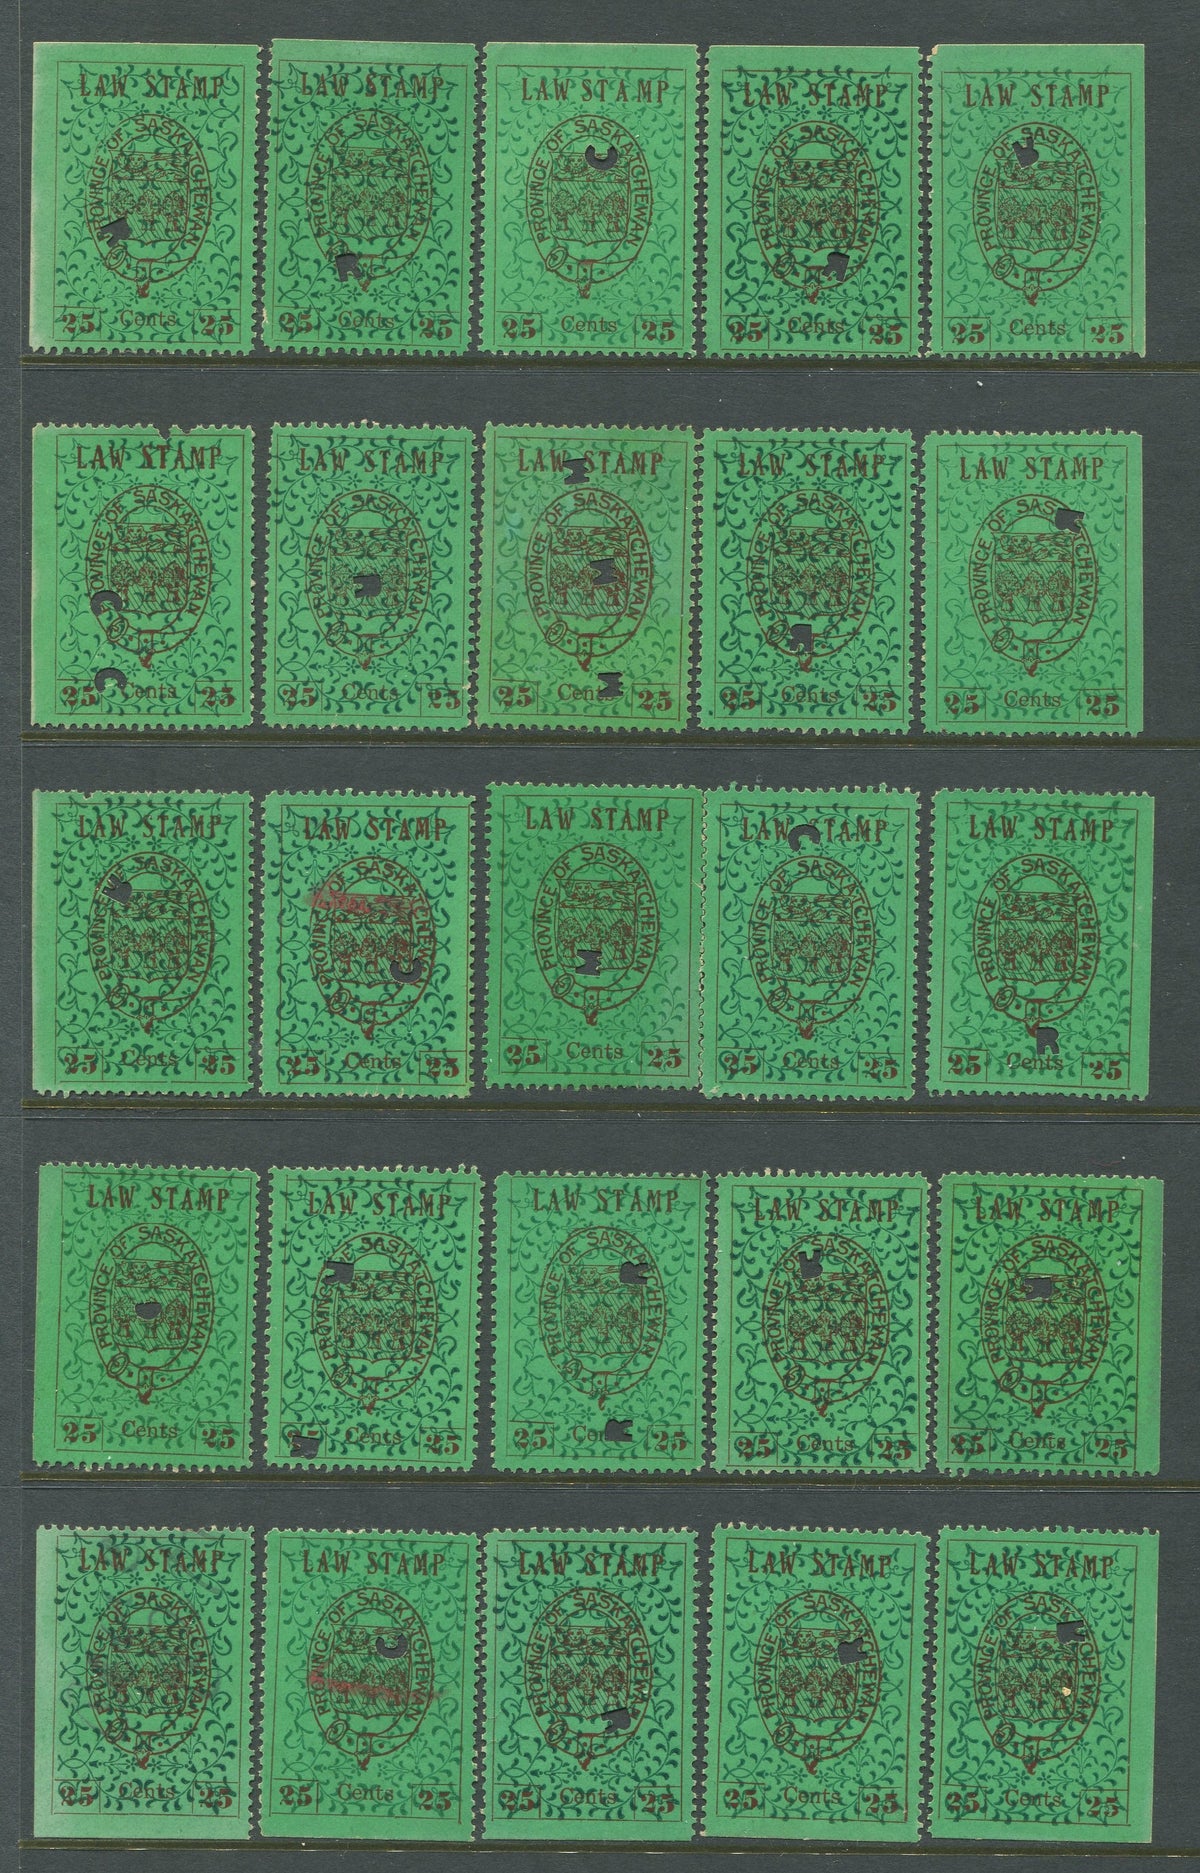 0004SL1709 - SL4 - Used Reconstructed Sheet - Deveney Stamps Ltd. Canadian Stamps